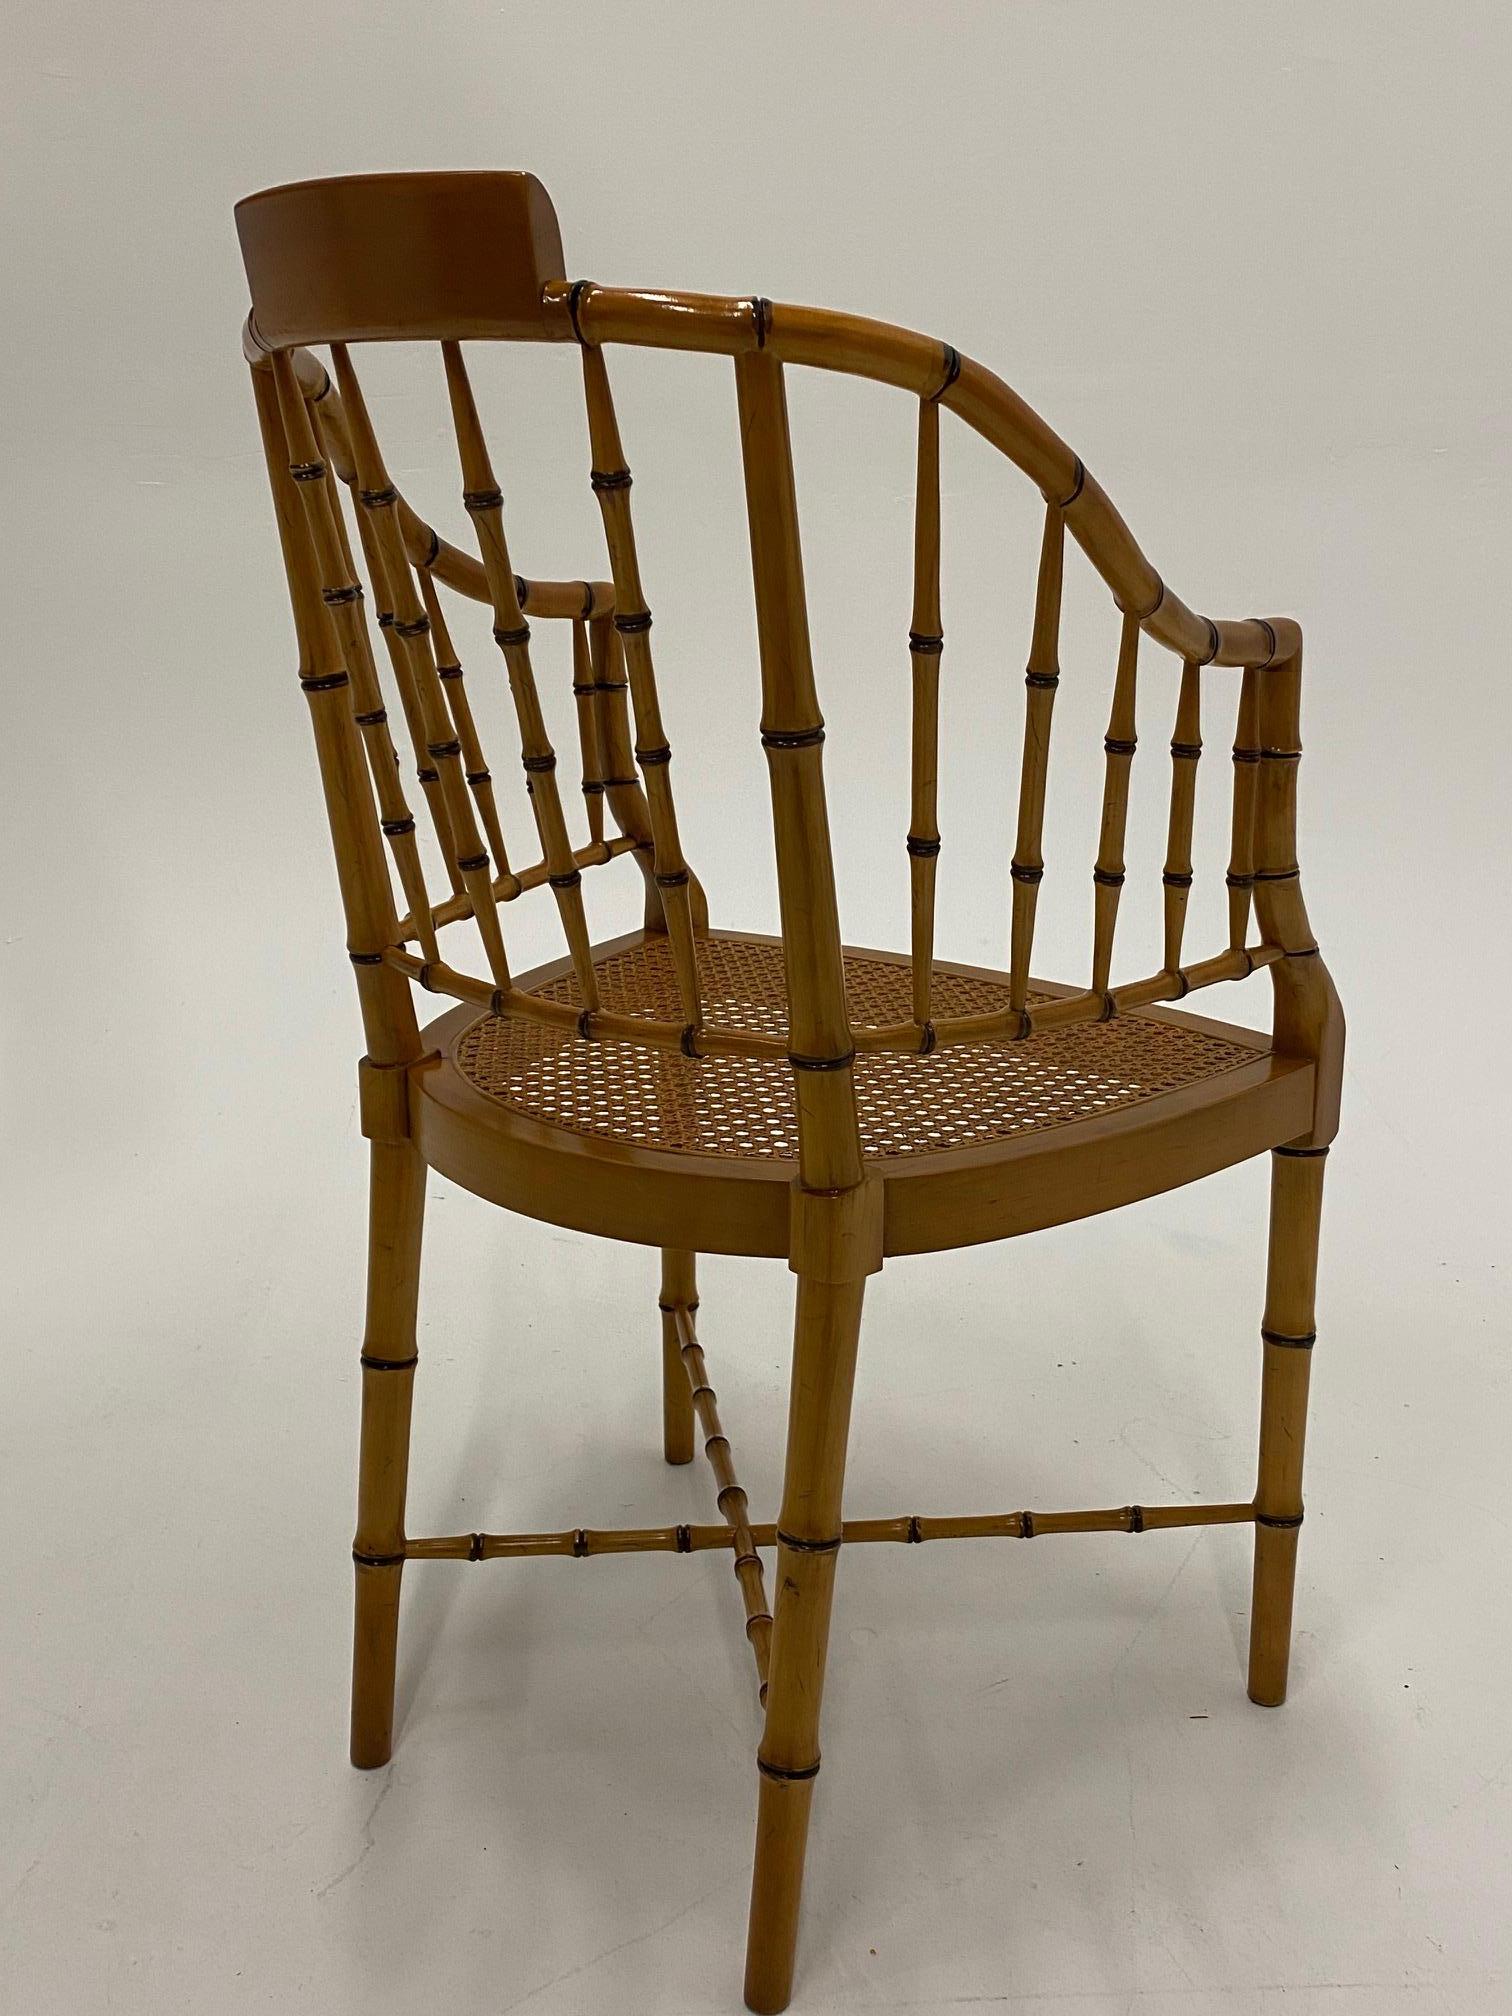 Great looking Regency armchair by Baker having faux bamboo frame, curved back with spindles and wonderful faux bamboo stretcher to match. Seat is a handsomely caned.